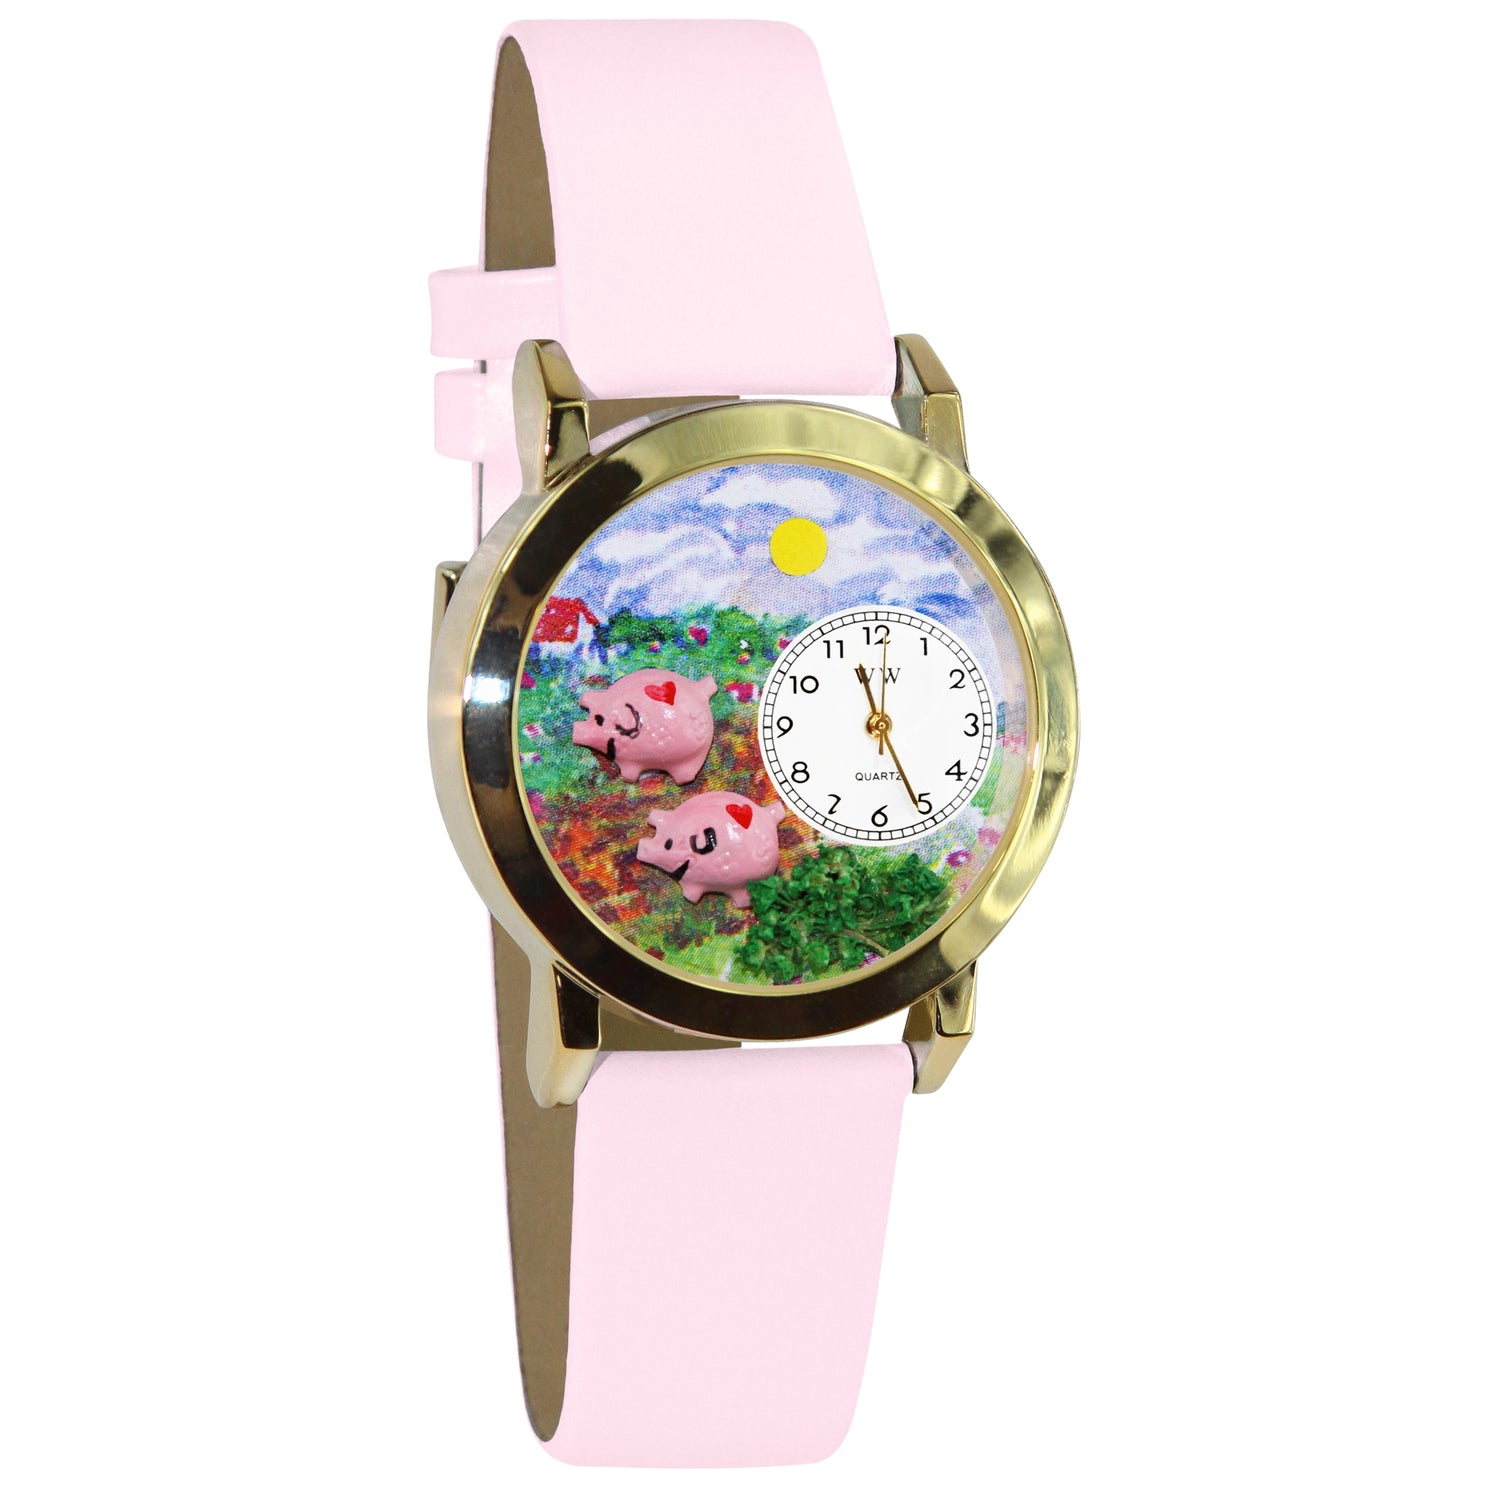 Whimsical Gifts | Pigs 3D Watch Small Style | Handmade in USA | Animal Lover | Farm Animal | Novelty Unique Fun Miniatures Gift | Gold Finish Pink Leather Watch Band